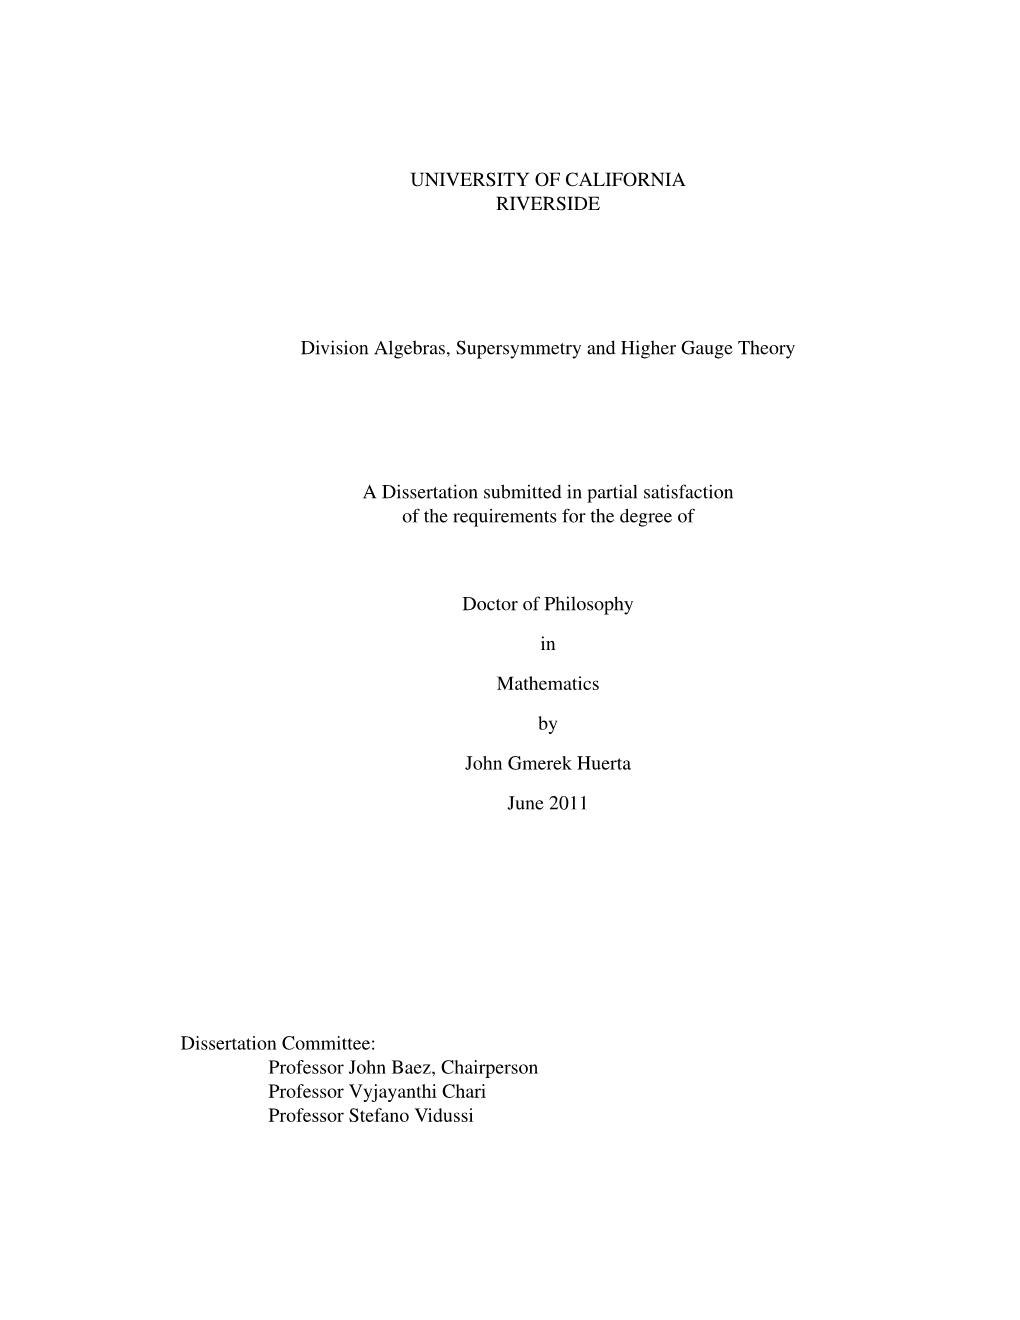 Division Algebras, Supersymmetry and Higher Gauge Theory